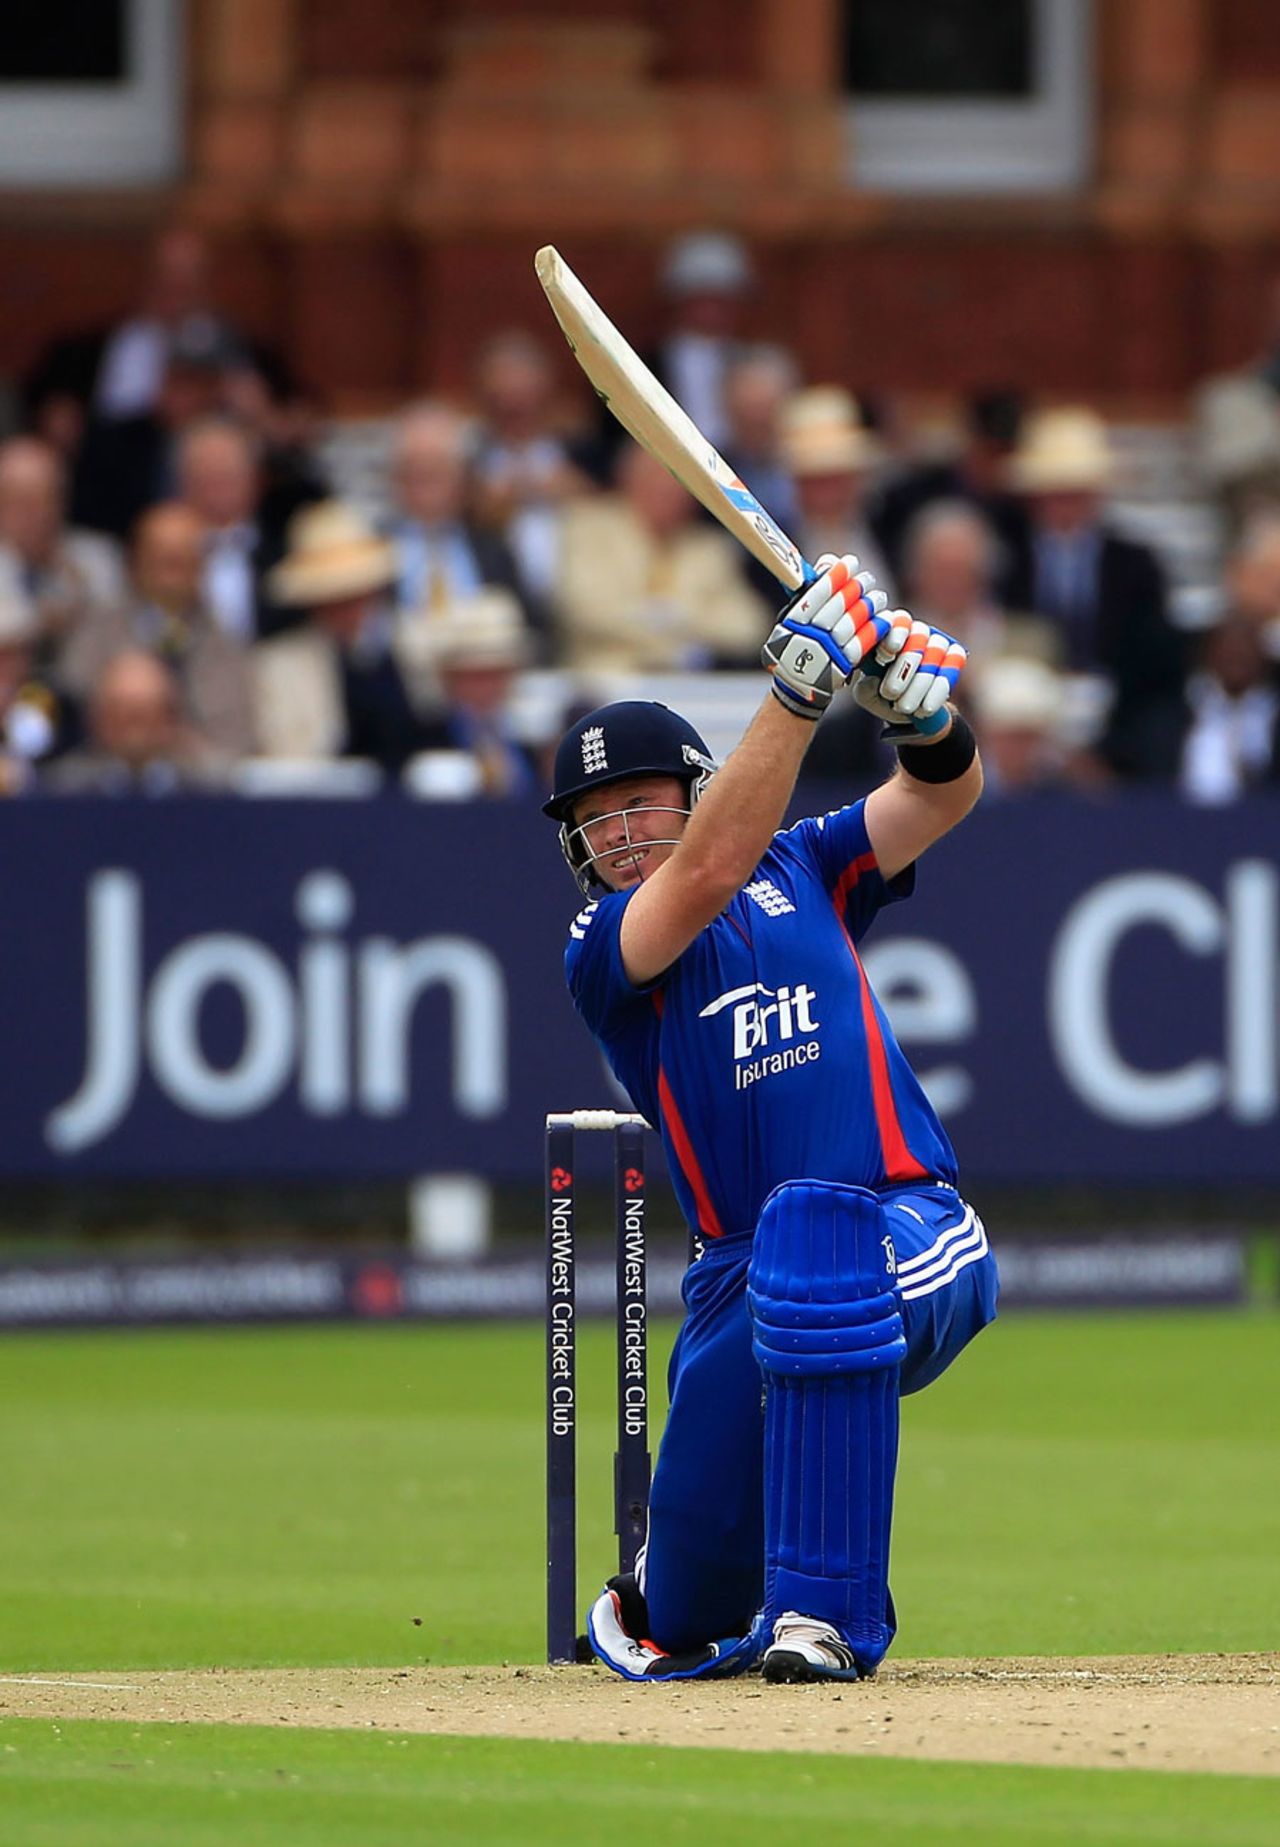 Ian Bell lifts a boundary over extra cover, England v Australia, 1st ODI, Lord's, June 29, 2012